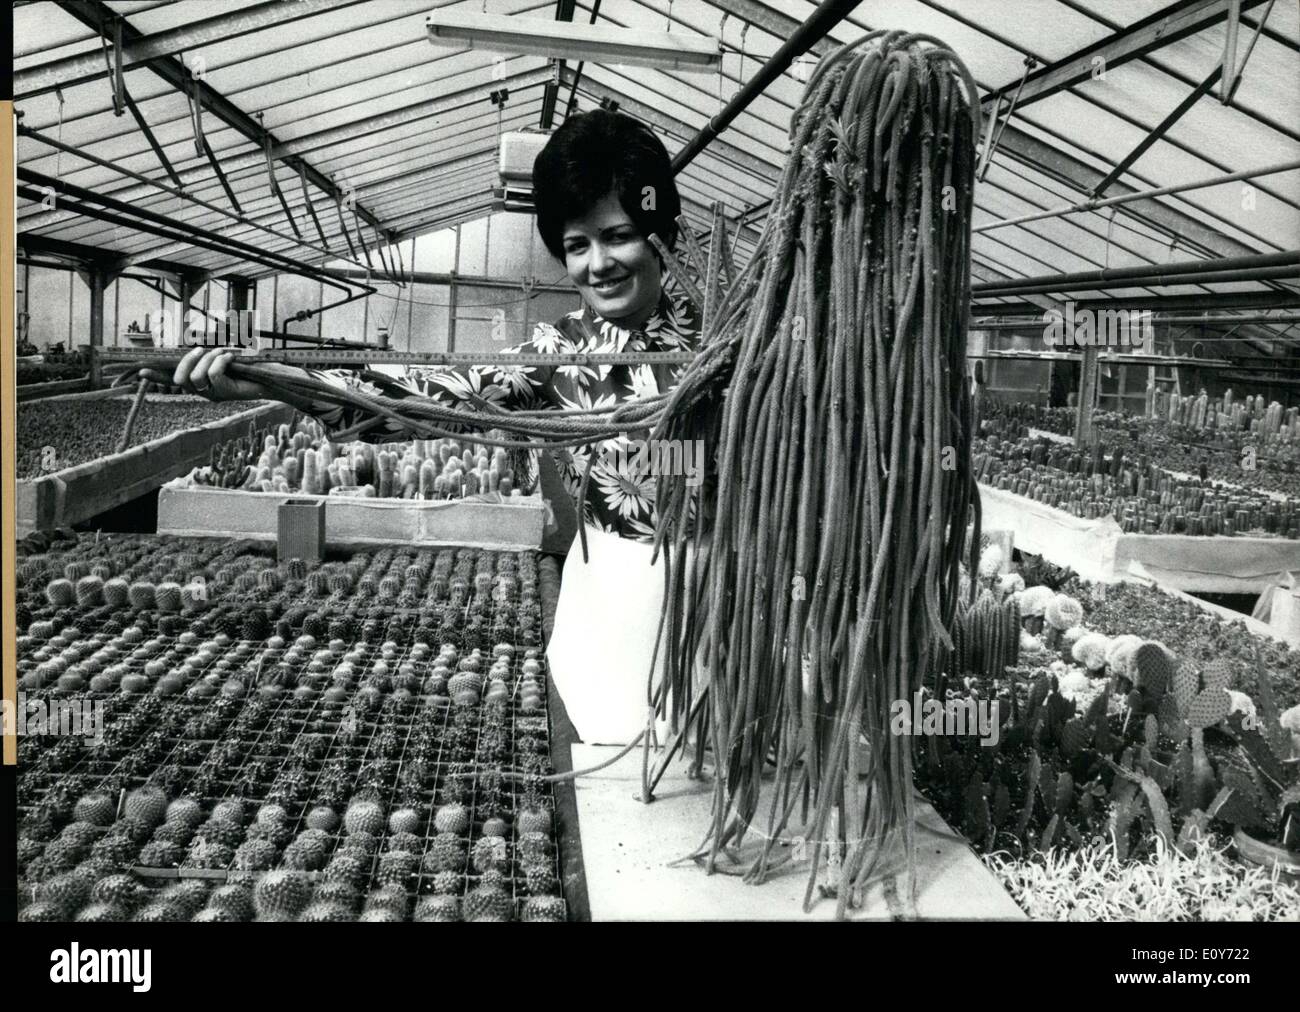 Mar. 17, 1969 - Pictured is a cactus grower in Kriftel near Frankfurt. The cactus is ''Aporocactus flagelliformis'' one of the largest of the cacti. Stock Photo